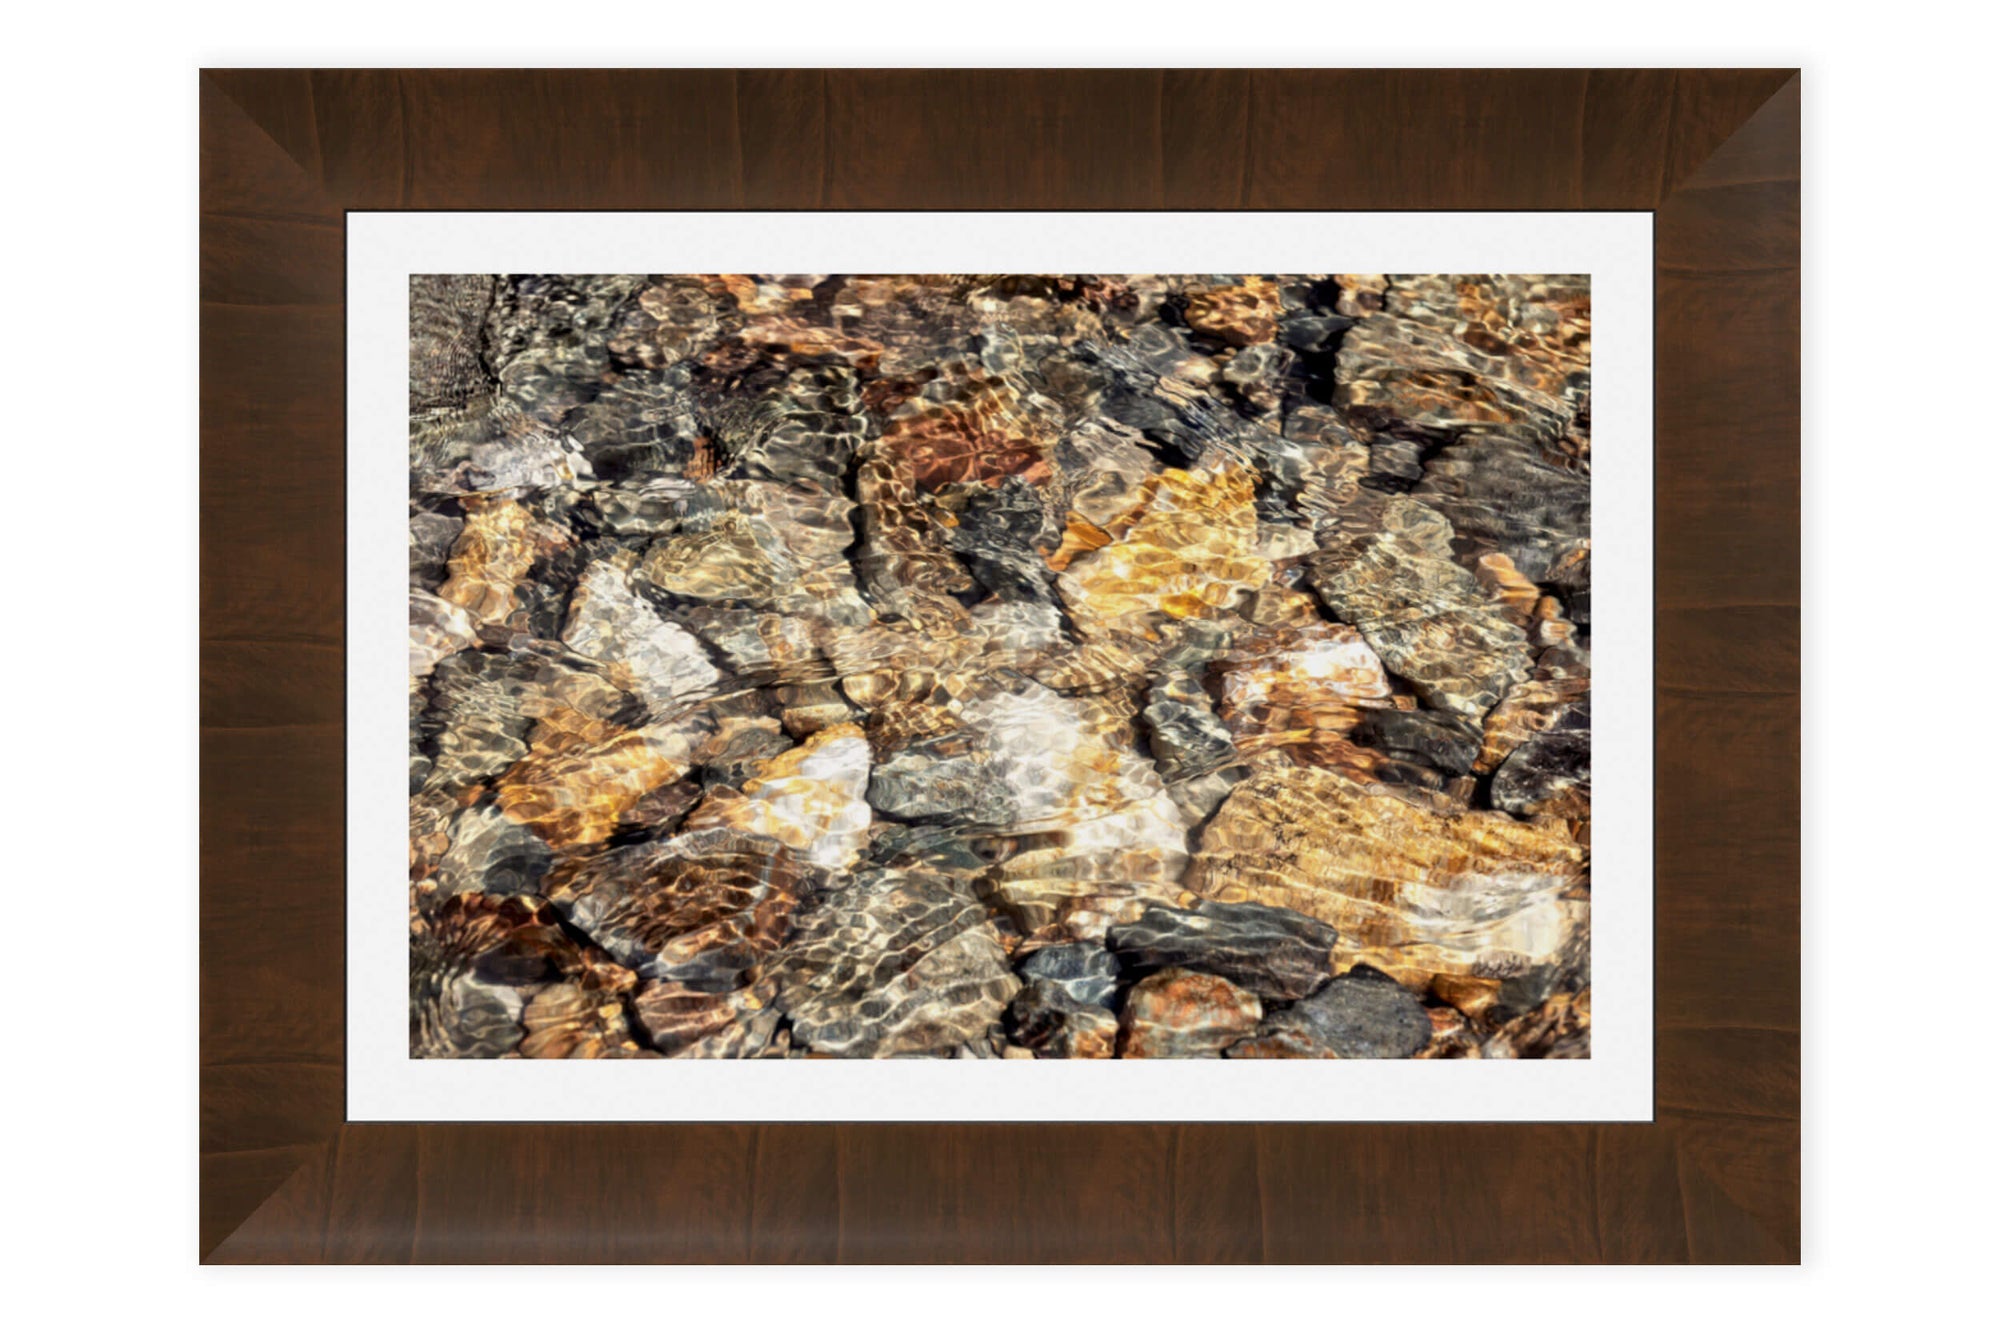 This piece of framed Telluride art shows glistening rocks in a Colorado River.